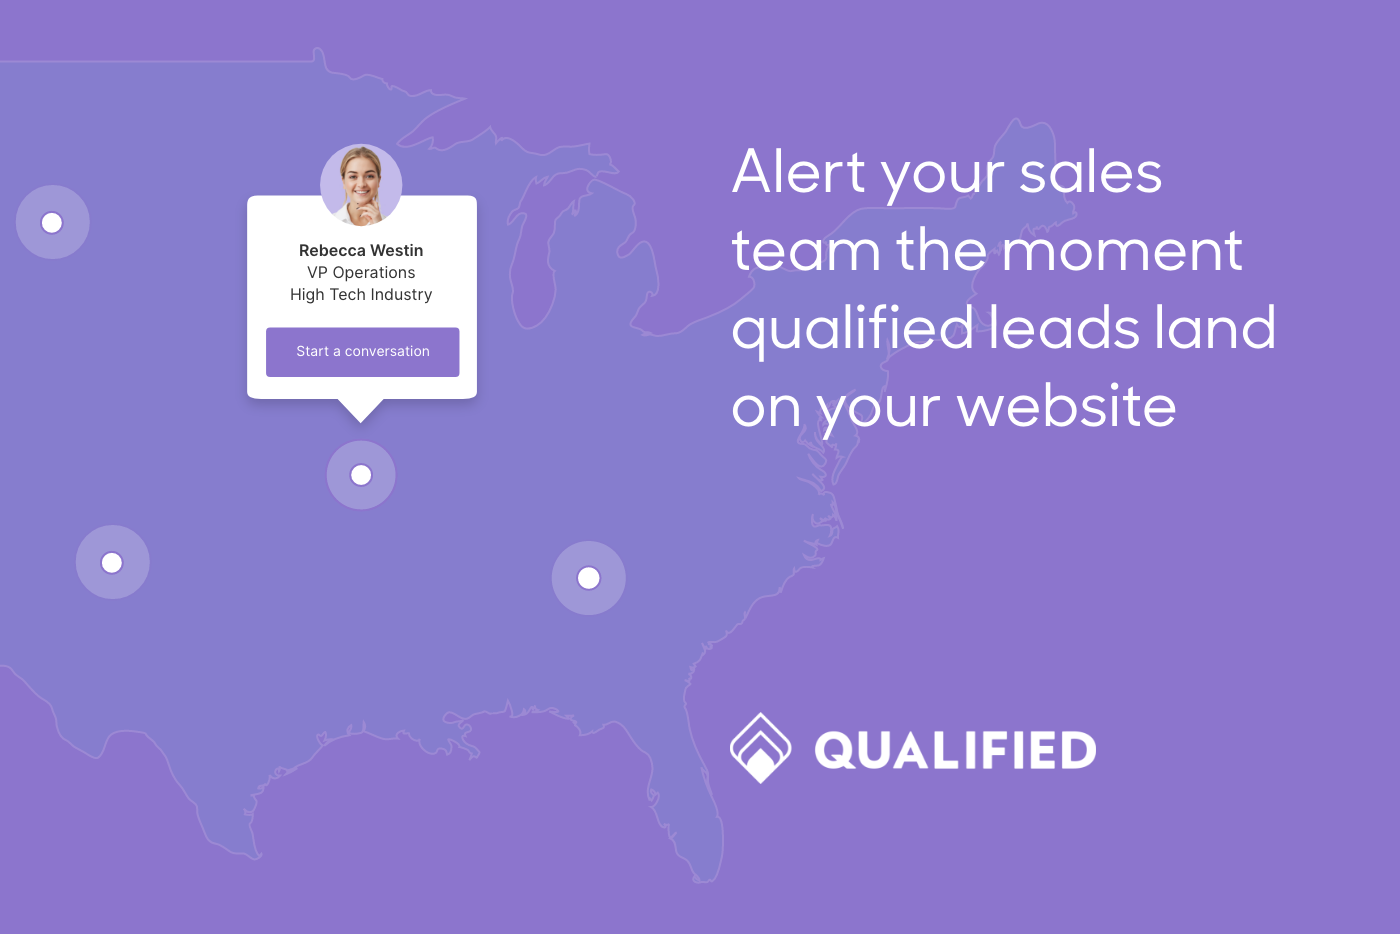 We'll alert your sales team the moment qualified leads land on your website and tell you exactly who they are, powered by apps like Salesforce, Pardot, 6Sense, Marketo, and Clearbit.